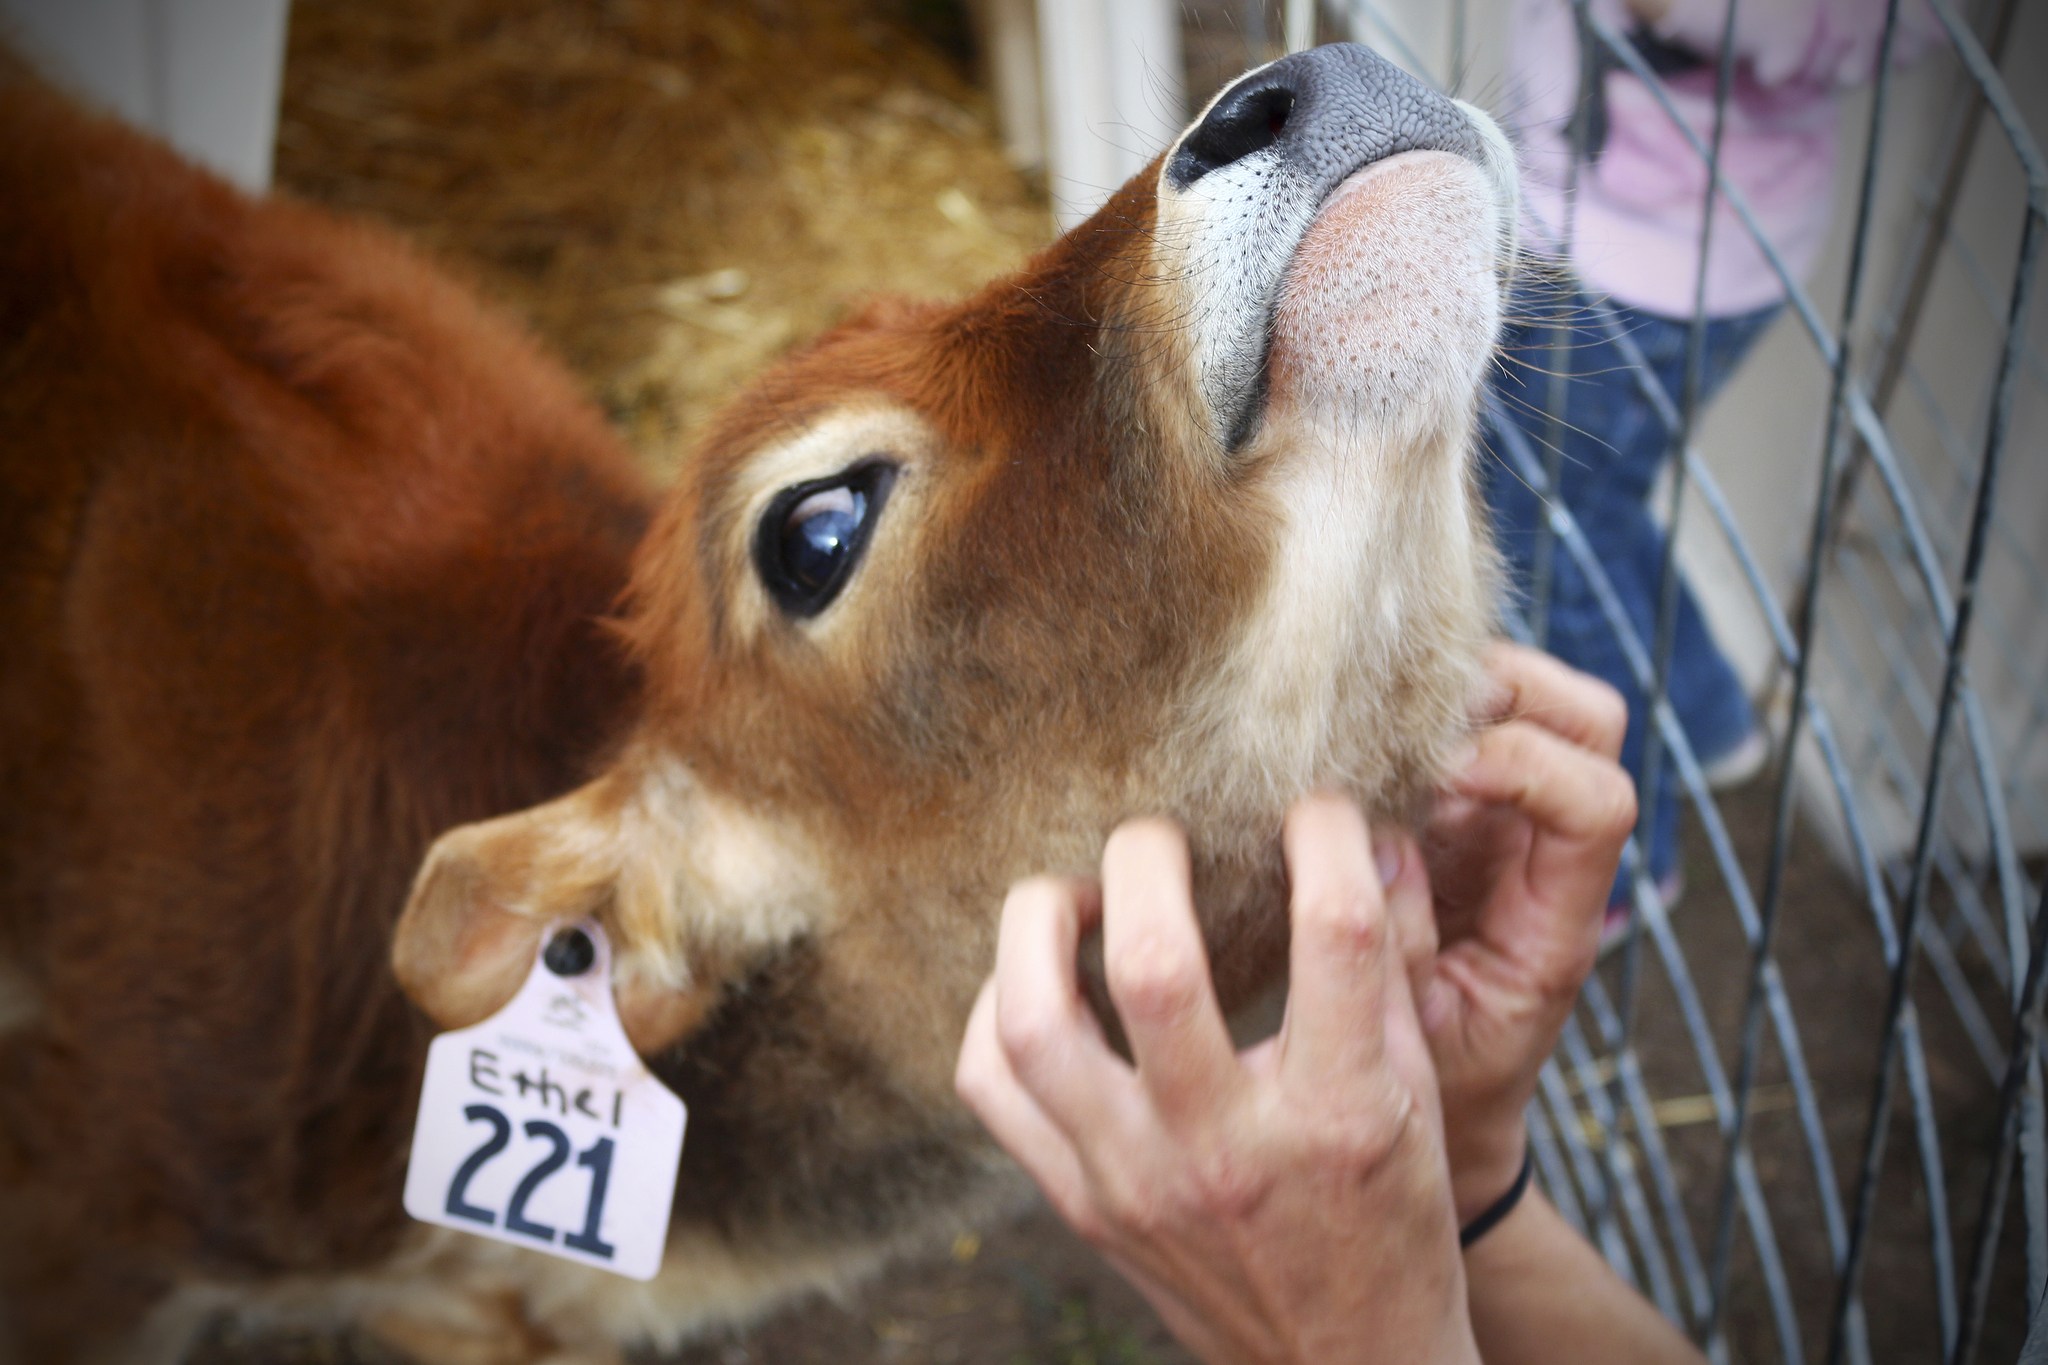 Ethel enjoys getting a chin scratch at Dungeness Valley Creamery. Photo by Lindsay Aspelund